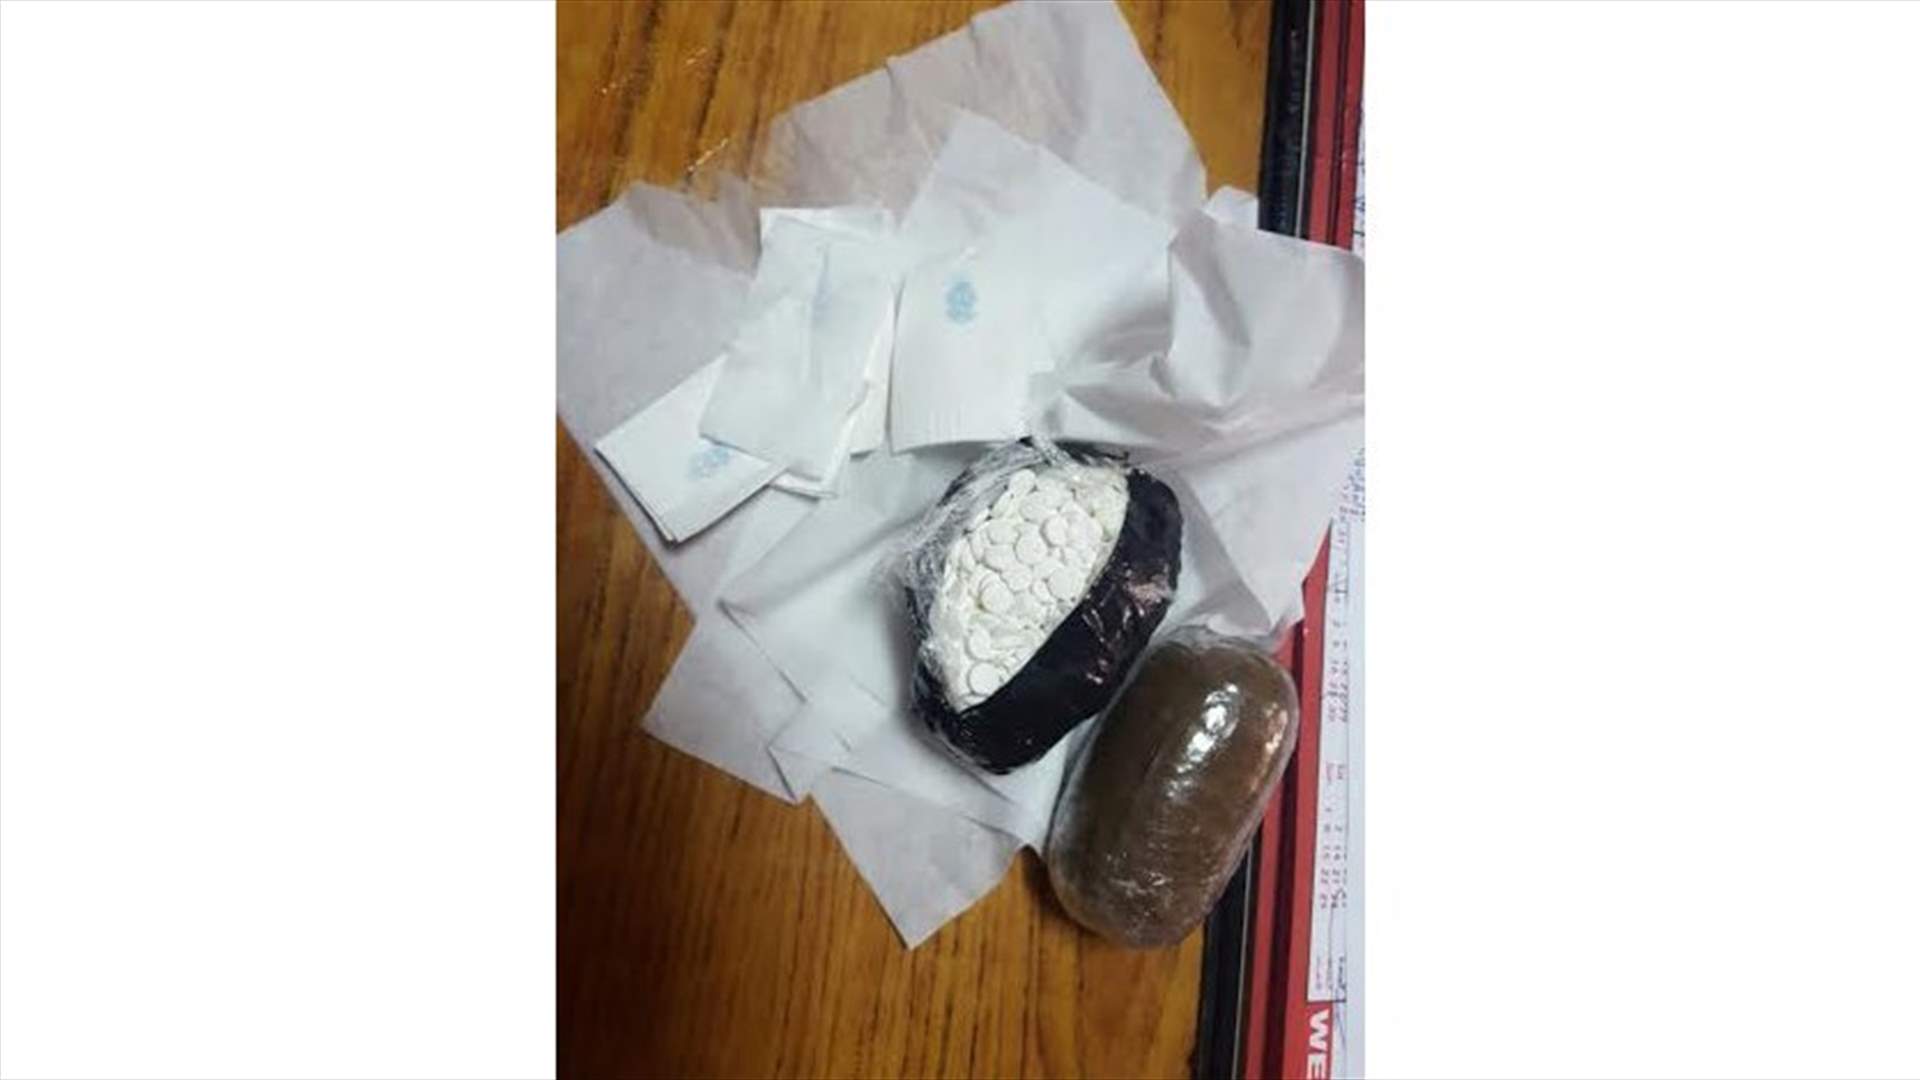 Female arrested for attempting to smuggle hashish into Roumieh Prison